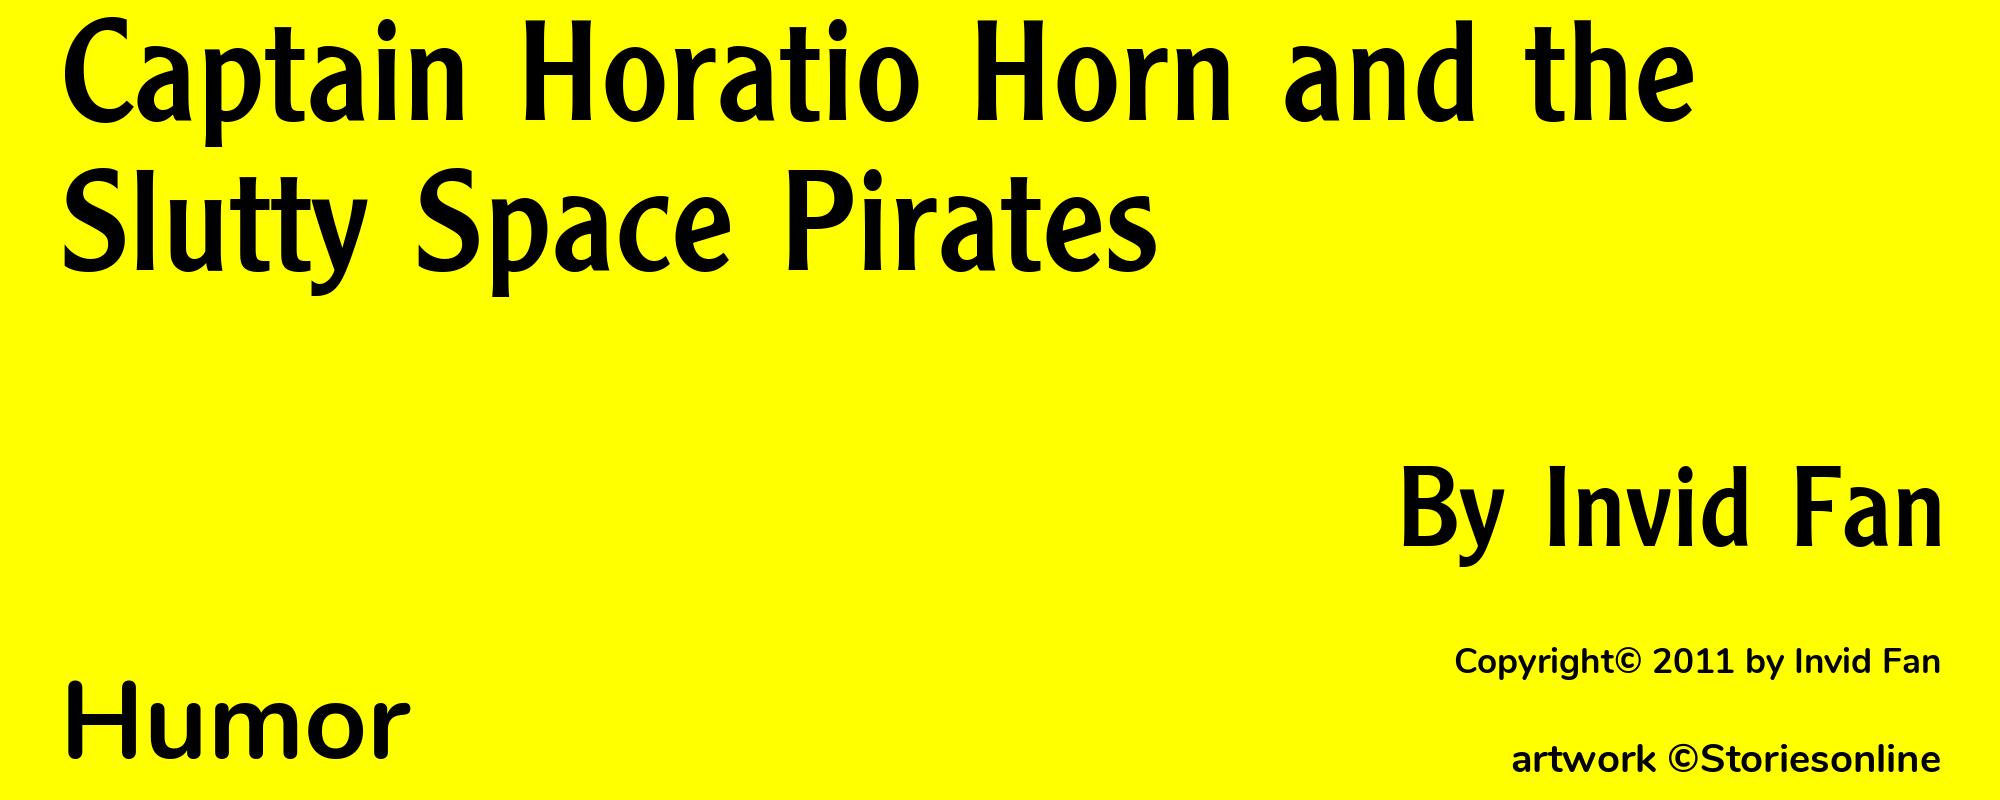 Captain Horatio Horn and the Slutty Space Pirates - Cover